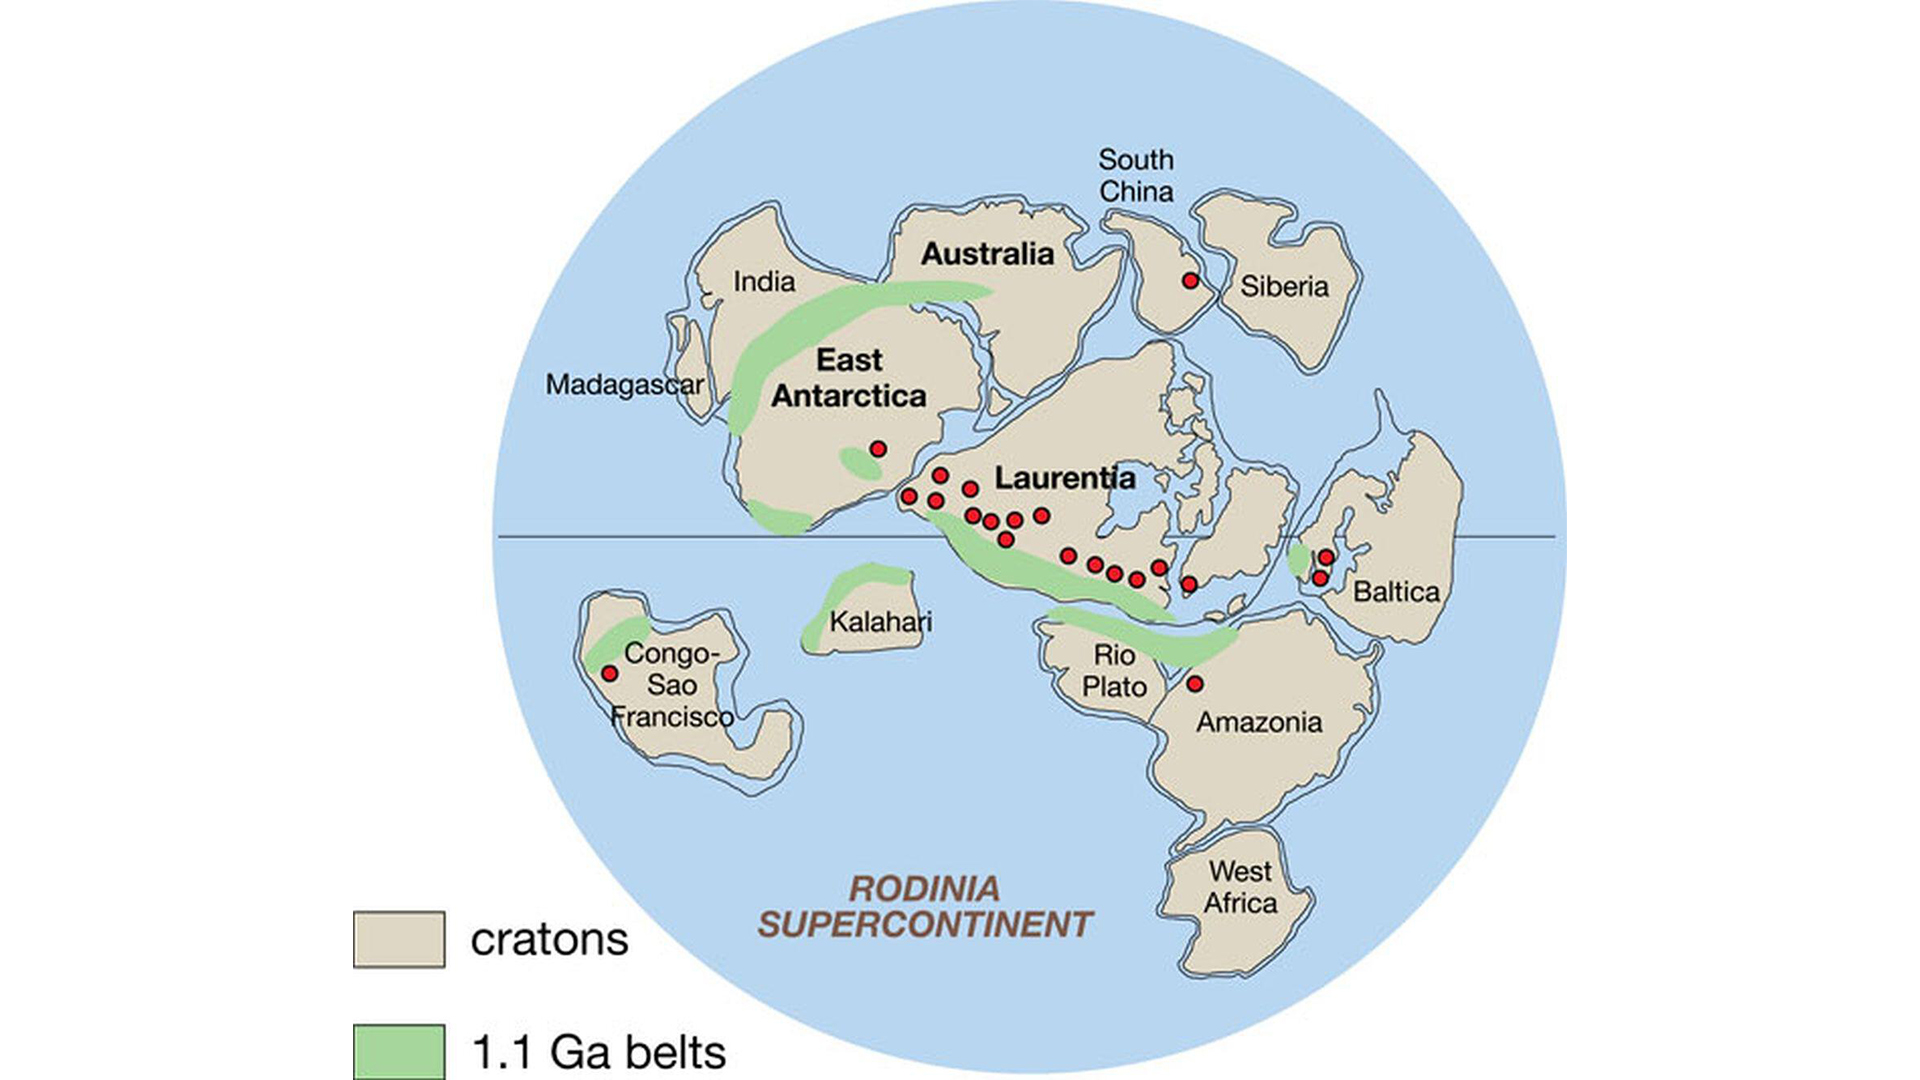 An illustration of the Rodinia supercontinent.